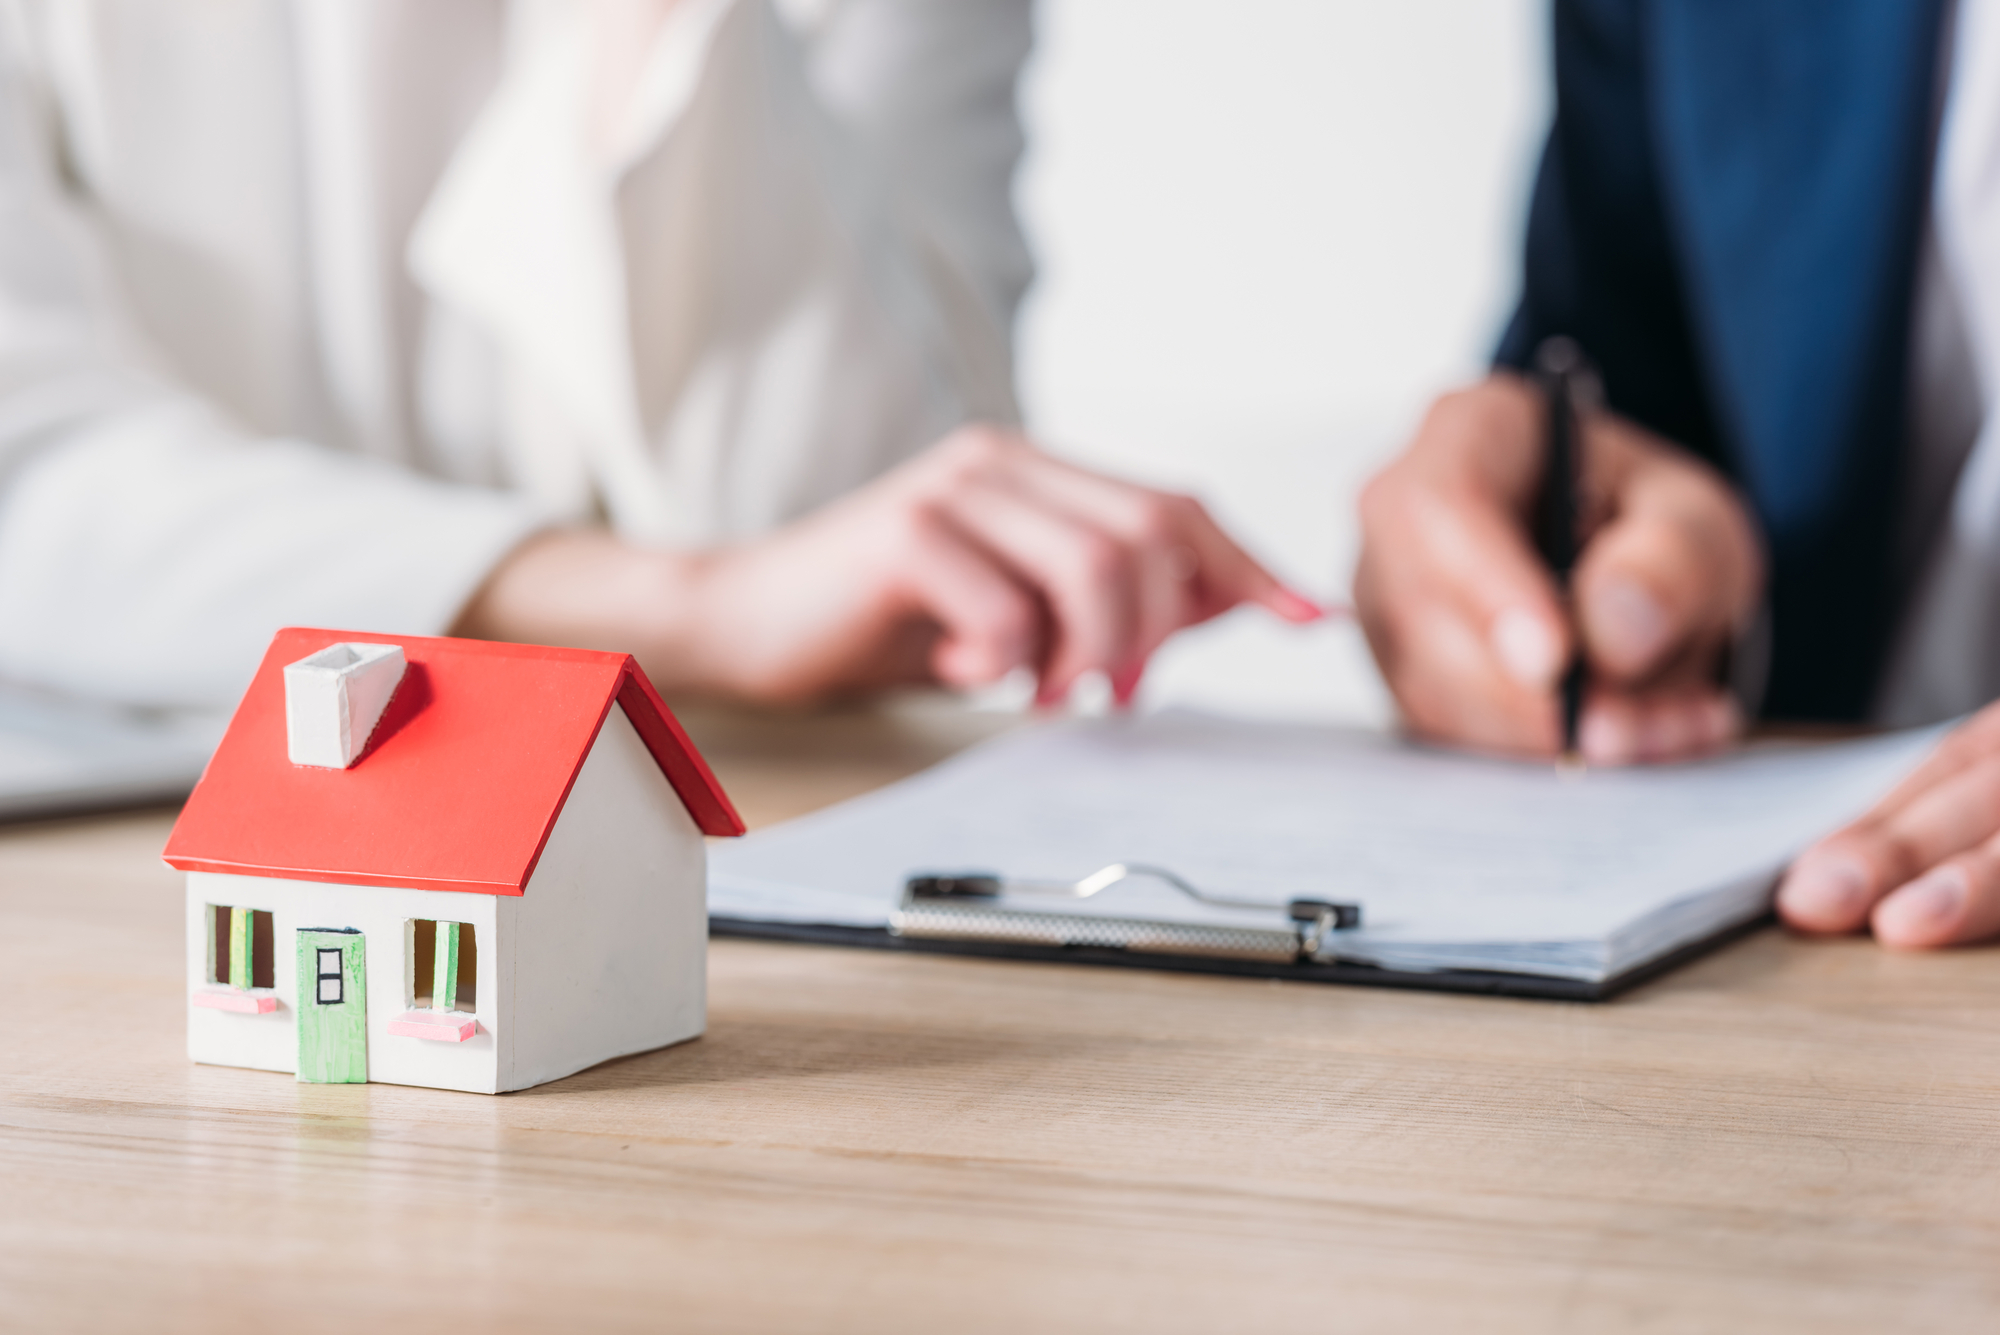 Five simple steps to getting mortgage ready